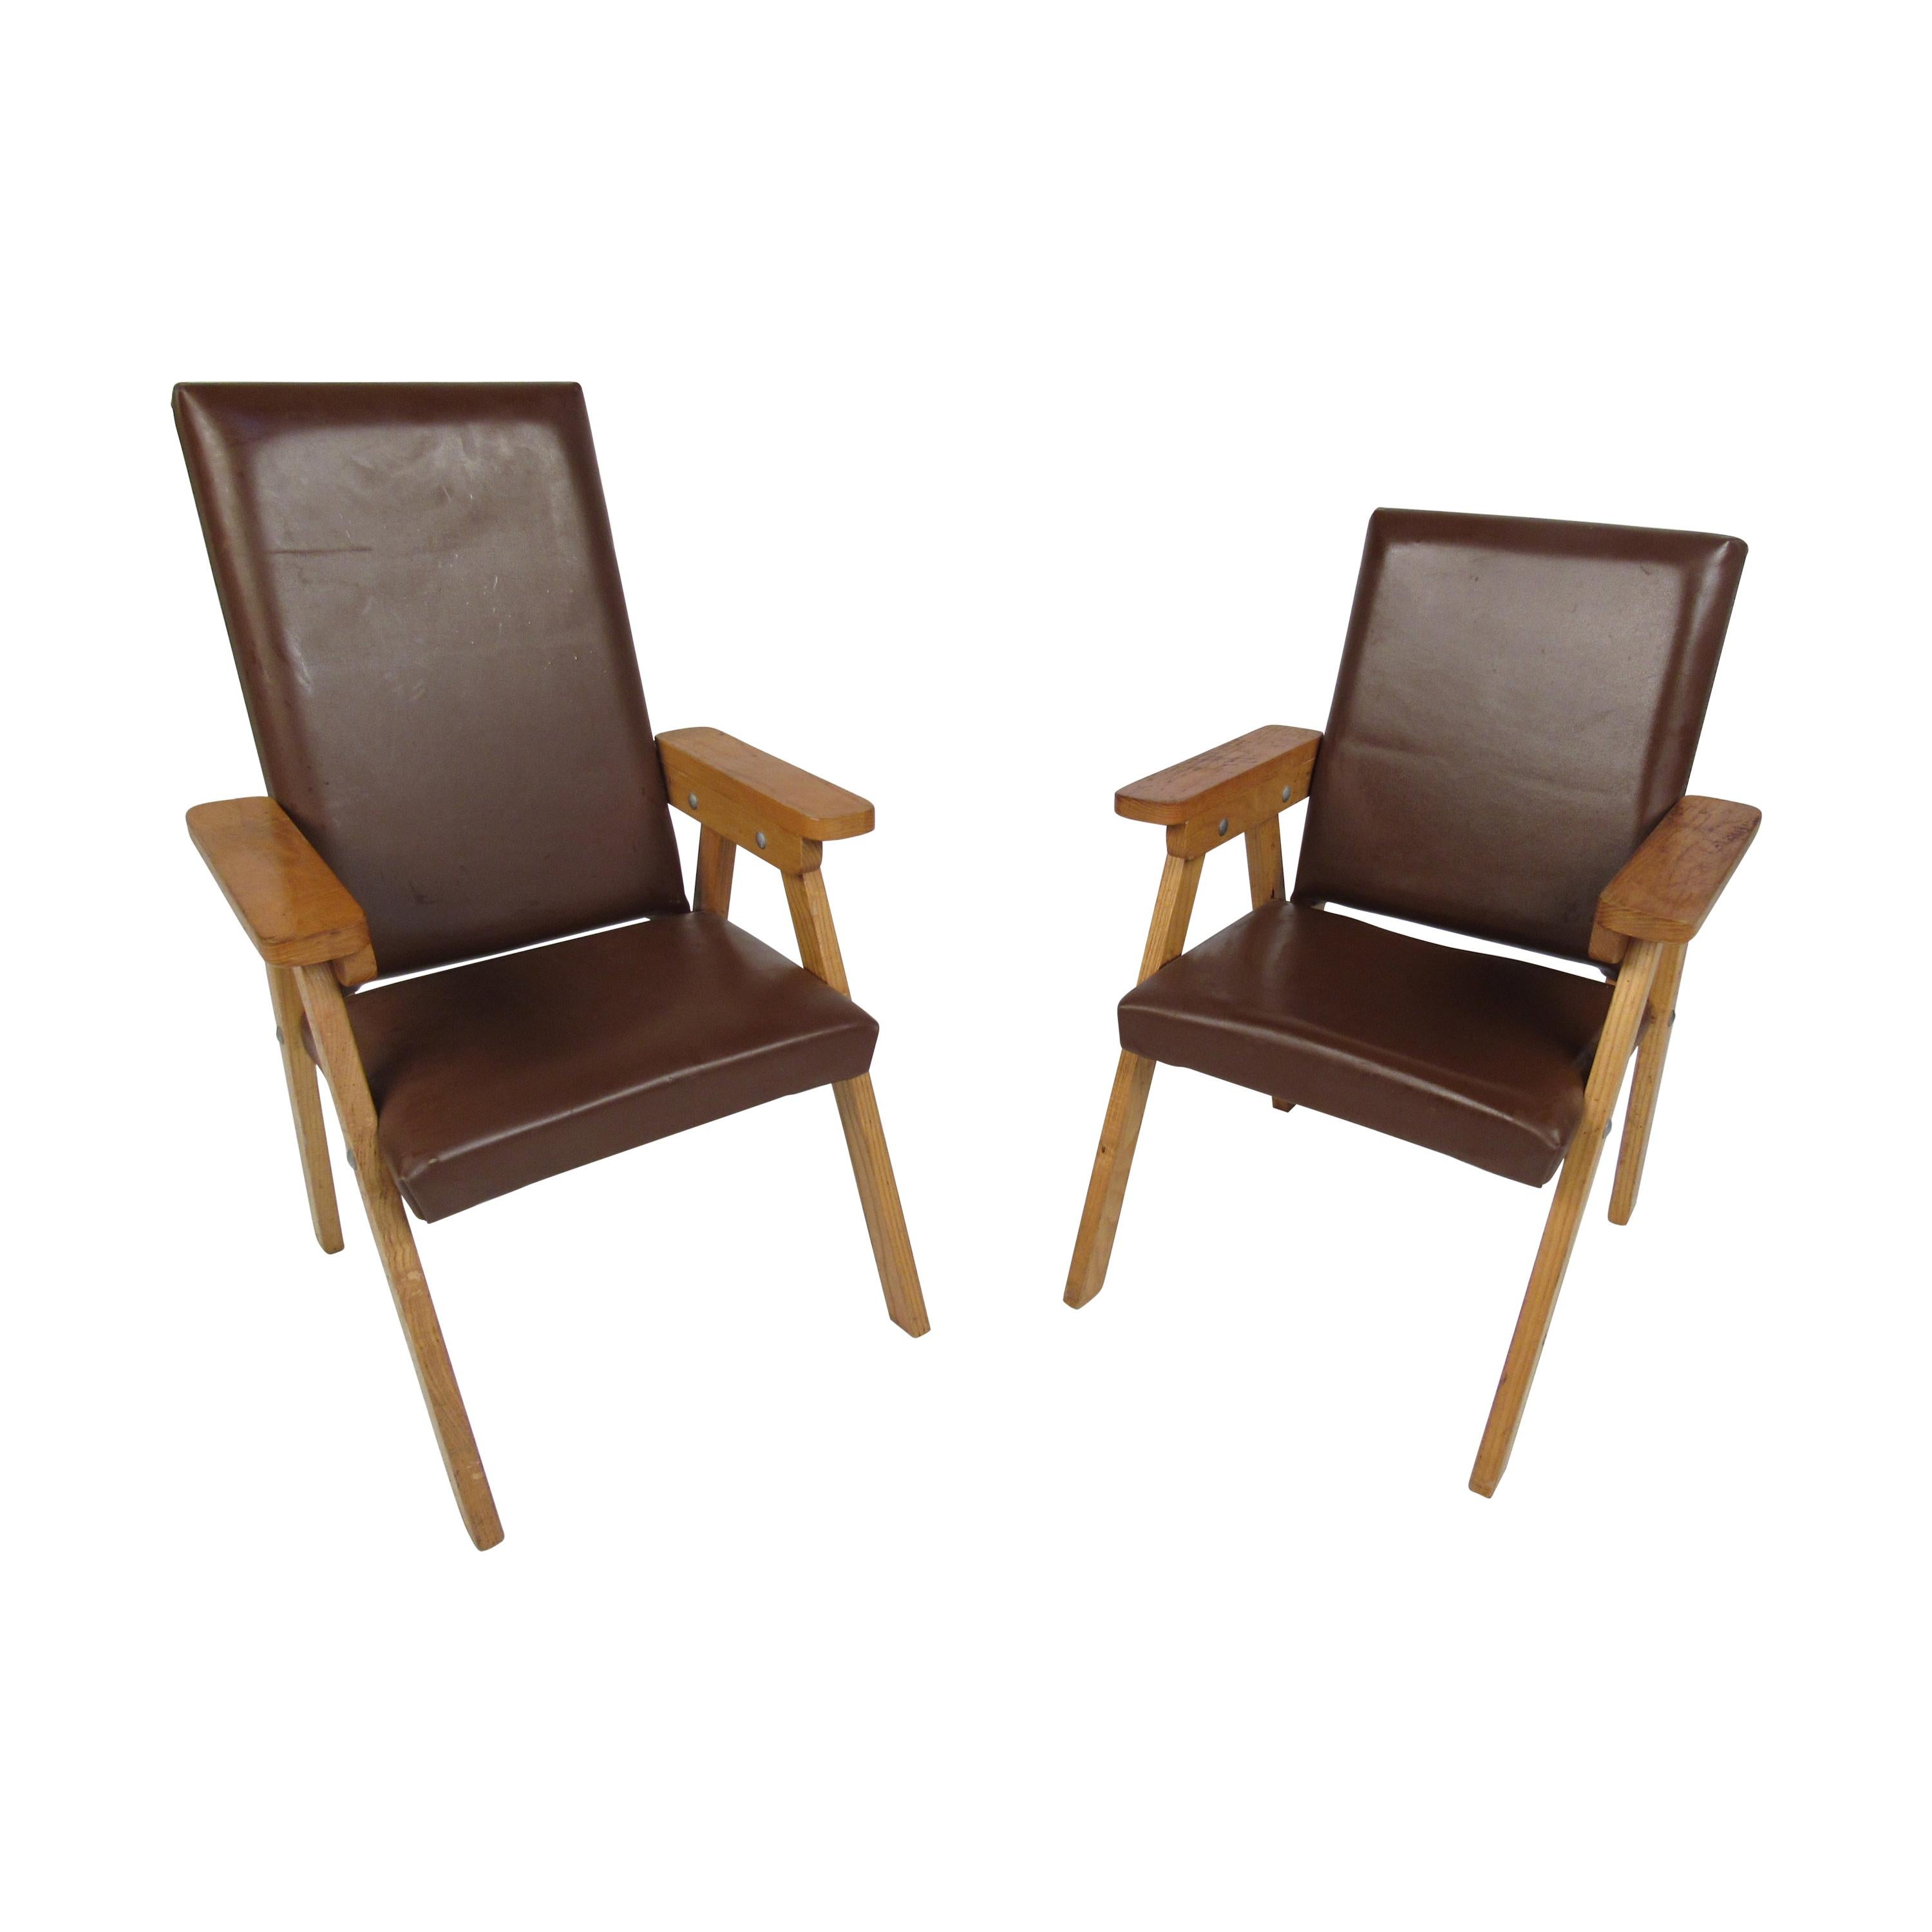 Pair of Small Vintage Modern Lounge Chairs